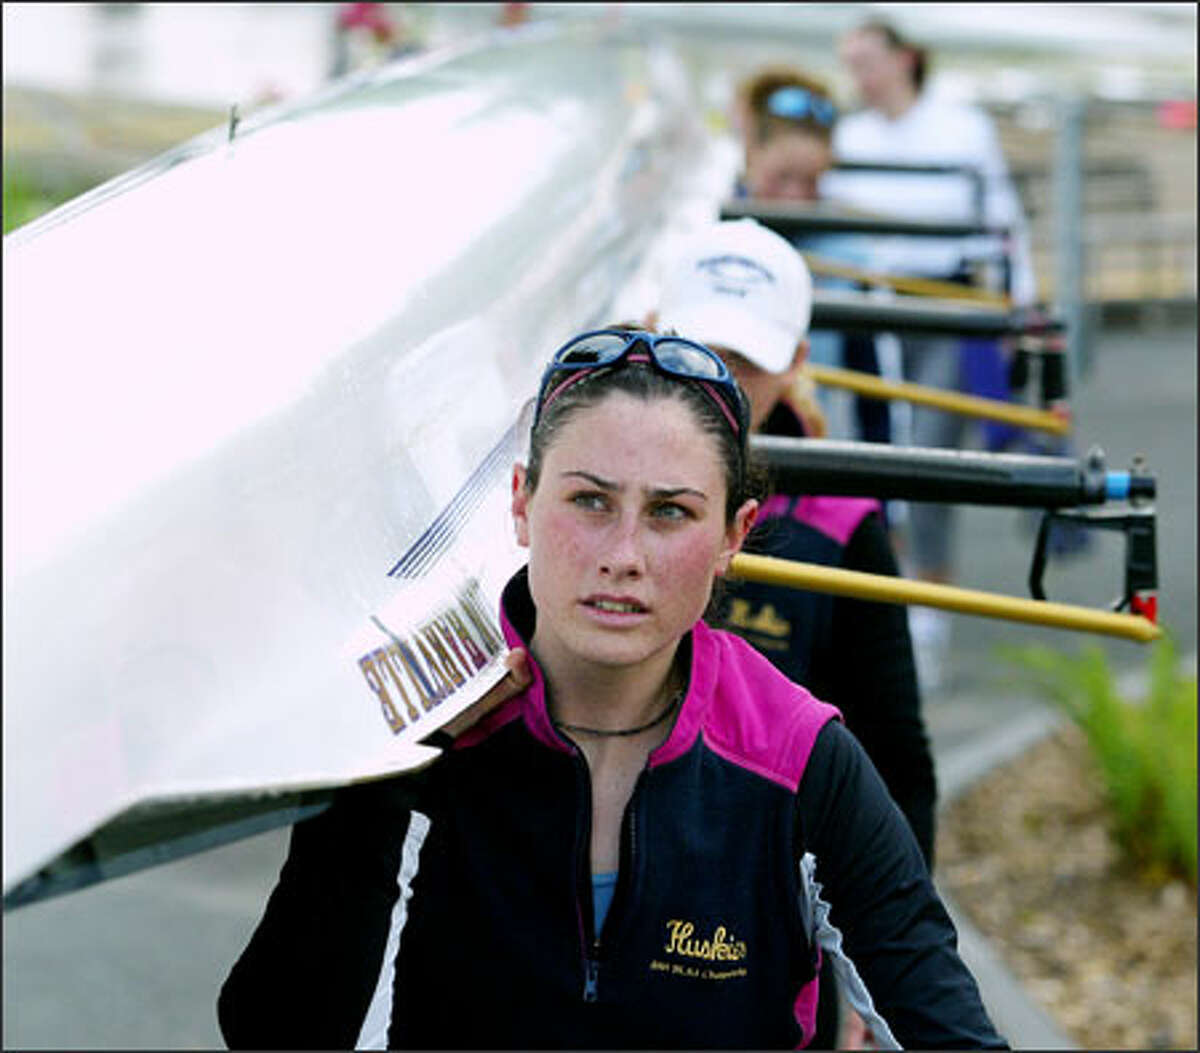 UW rower Marah Connole and her teammates load their boat for the NCAA championship this weekend.